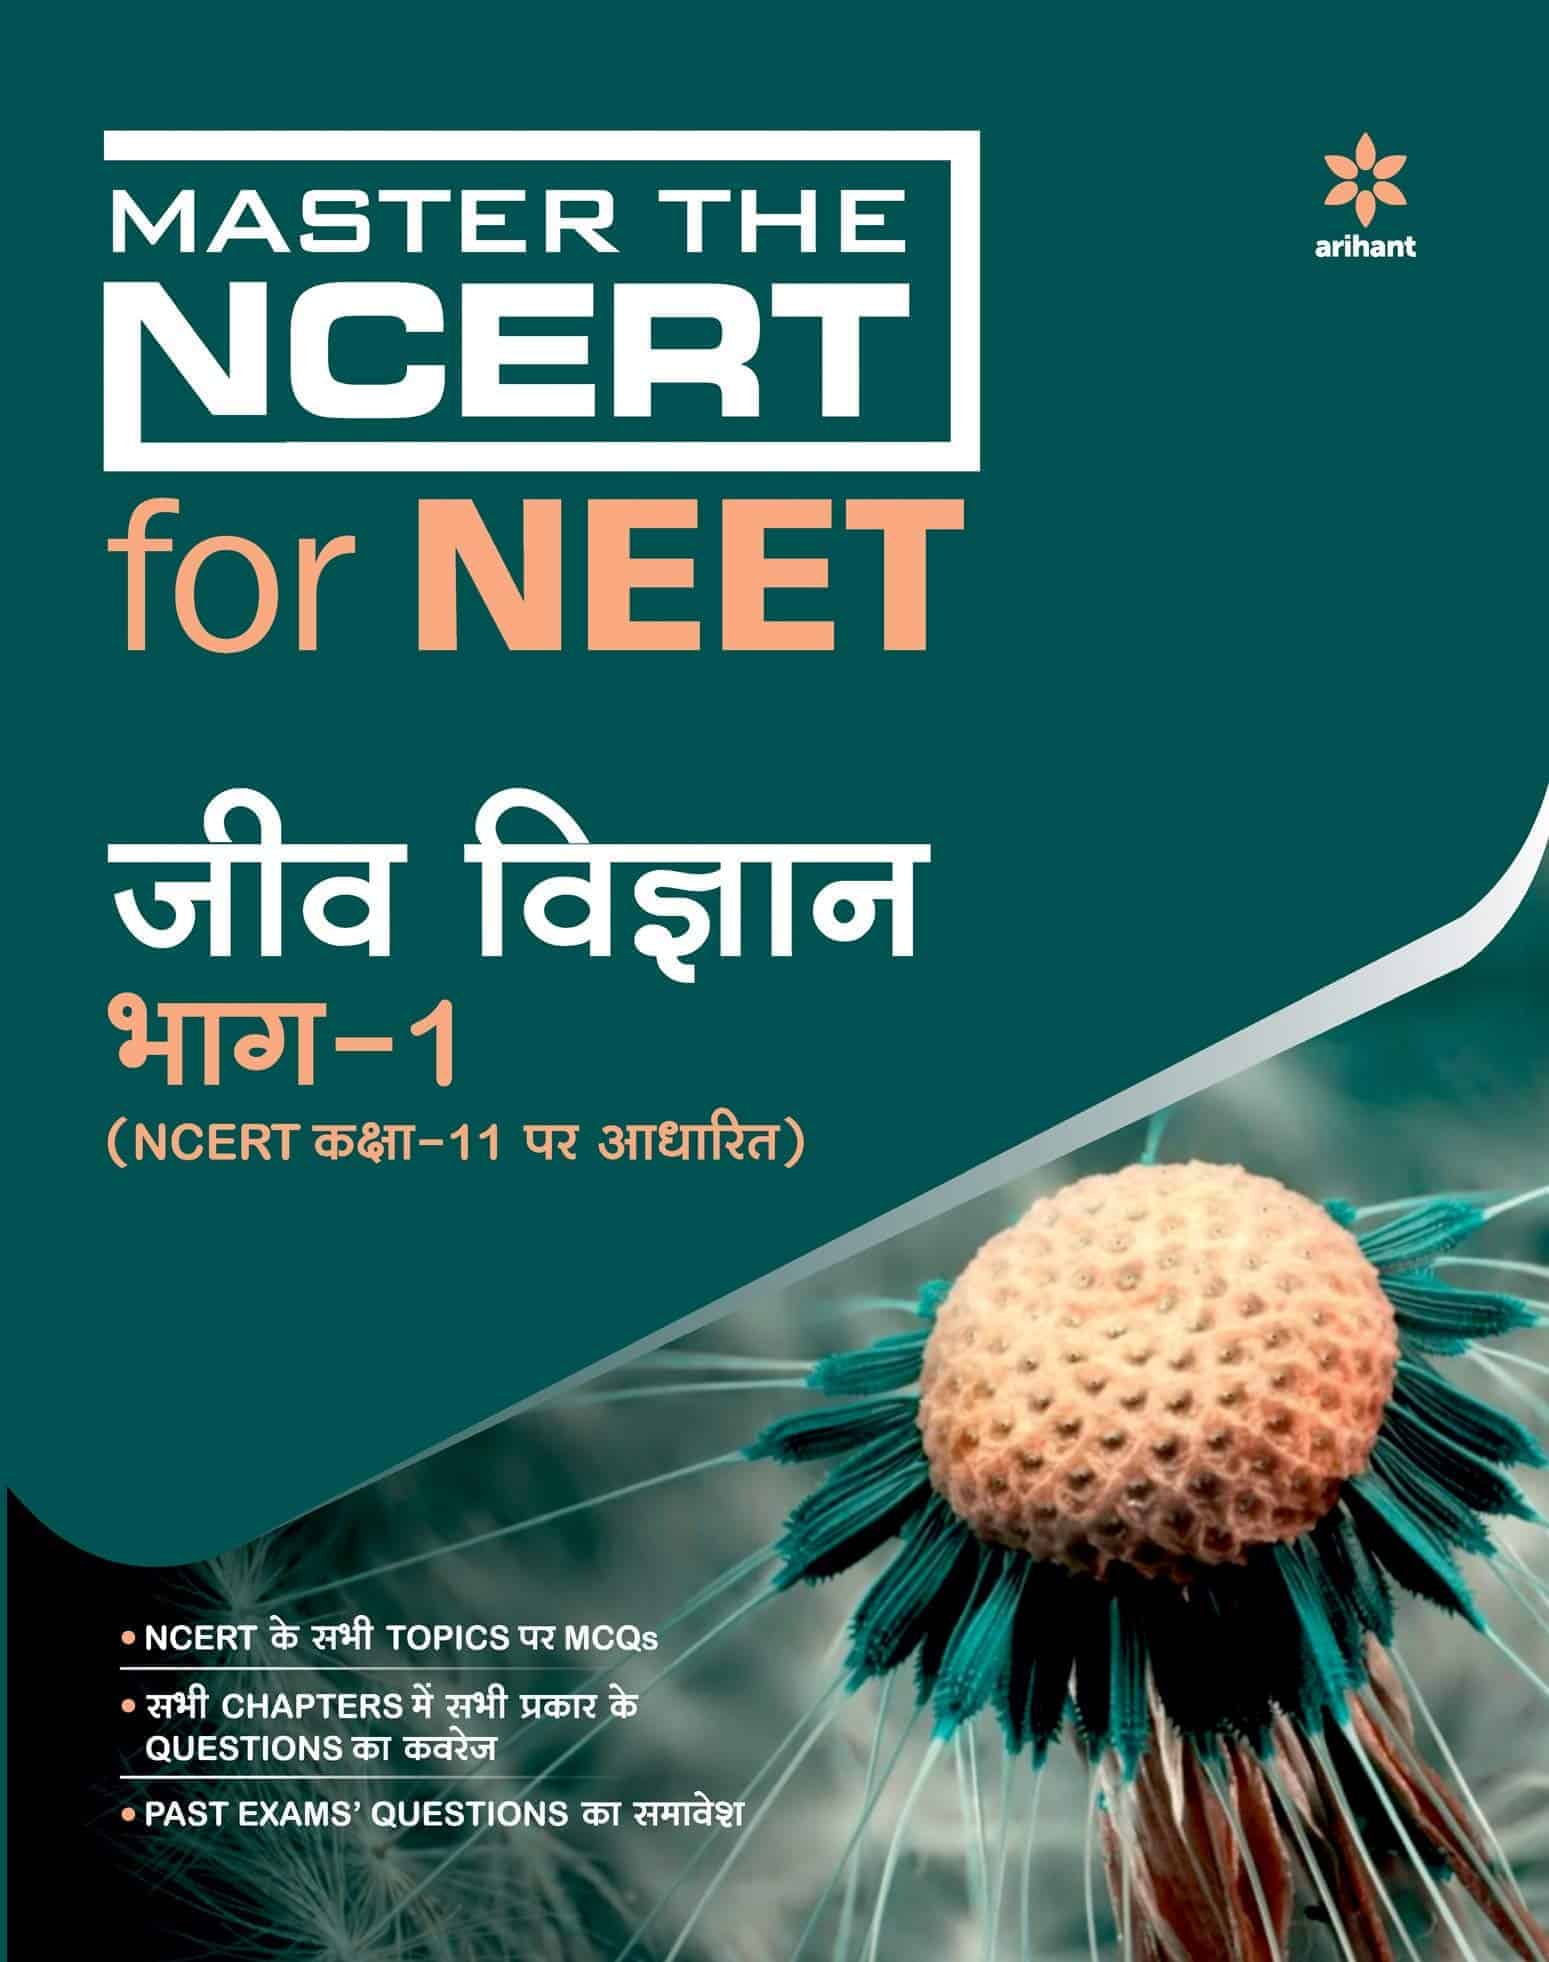 Master The NCERT for NEET Jeev Vigyan by Arihant Publication